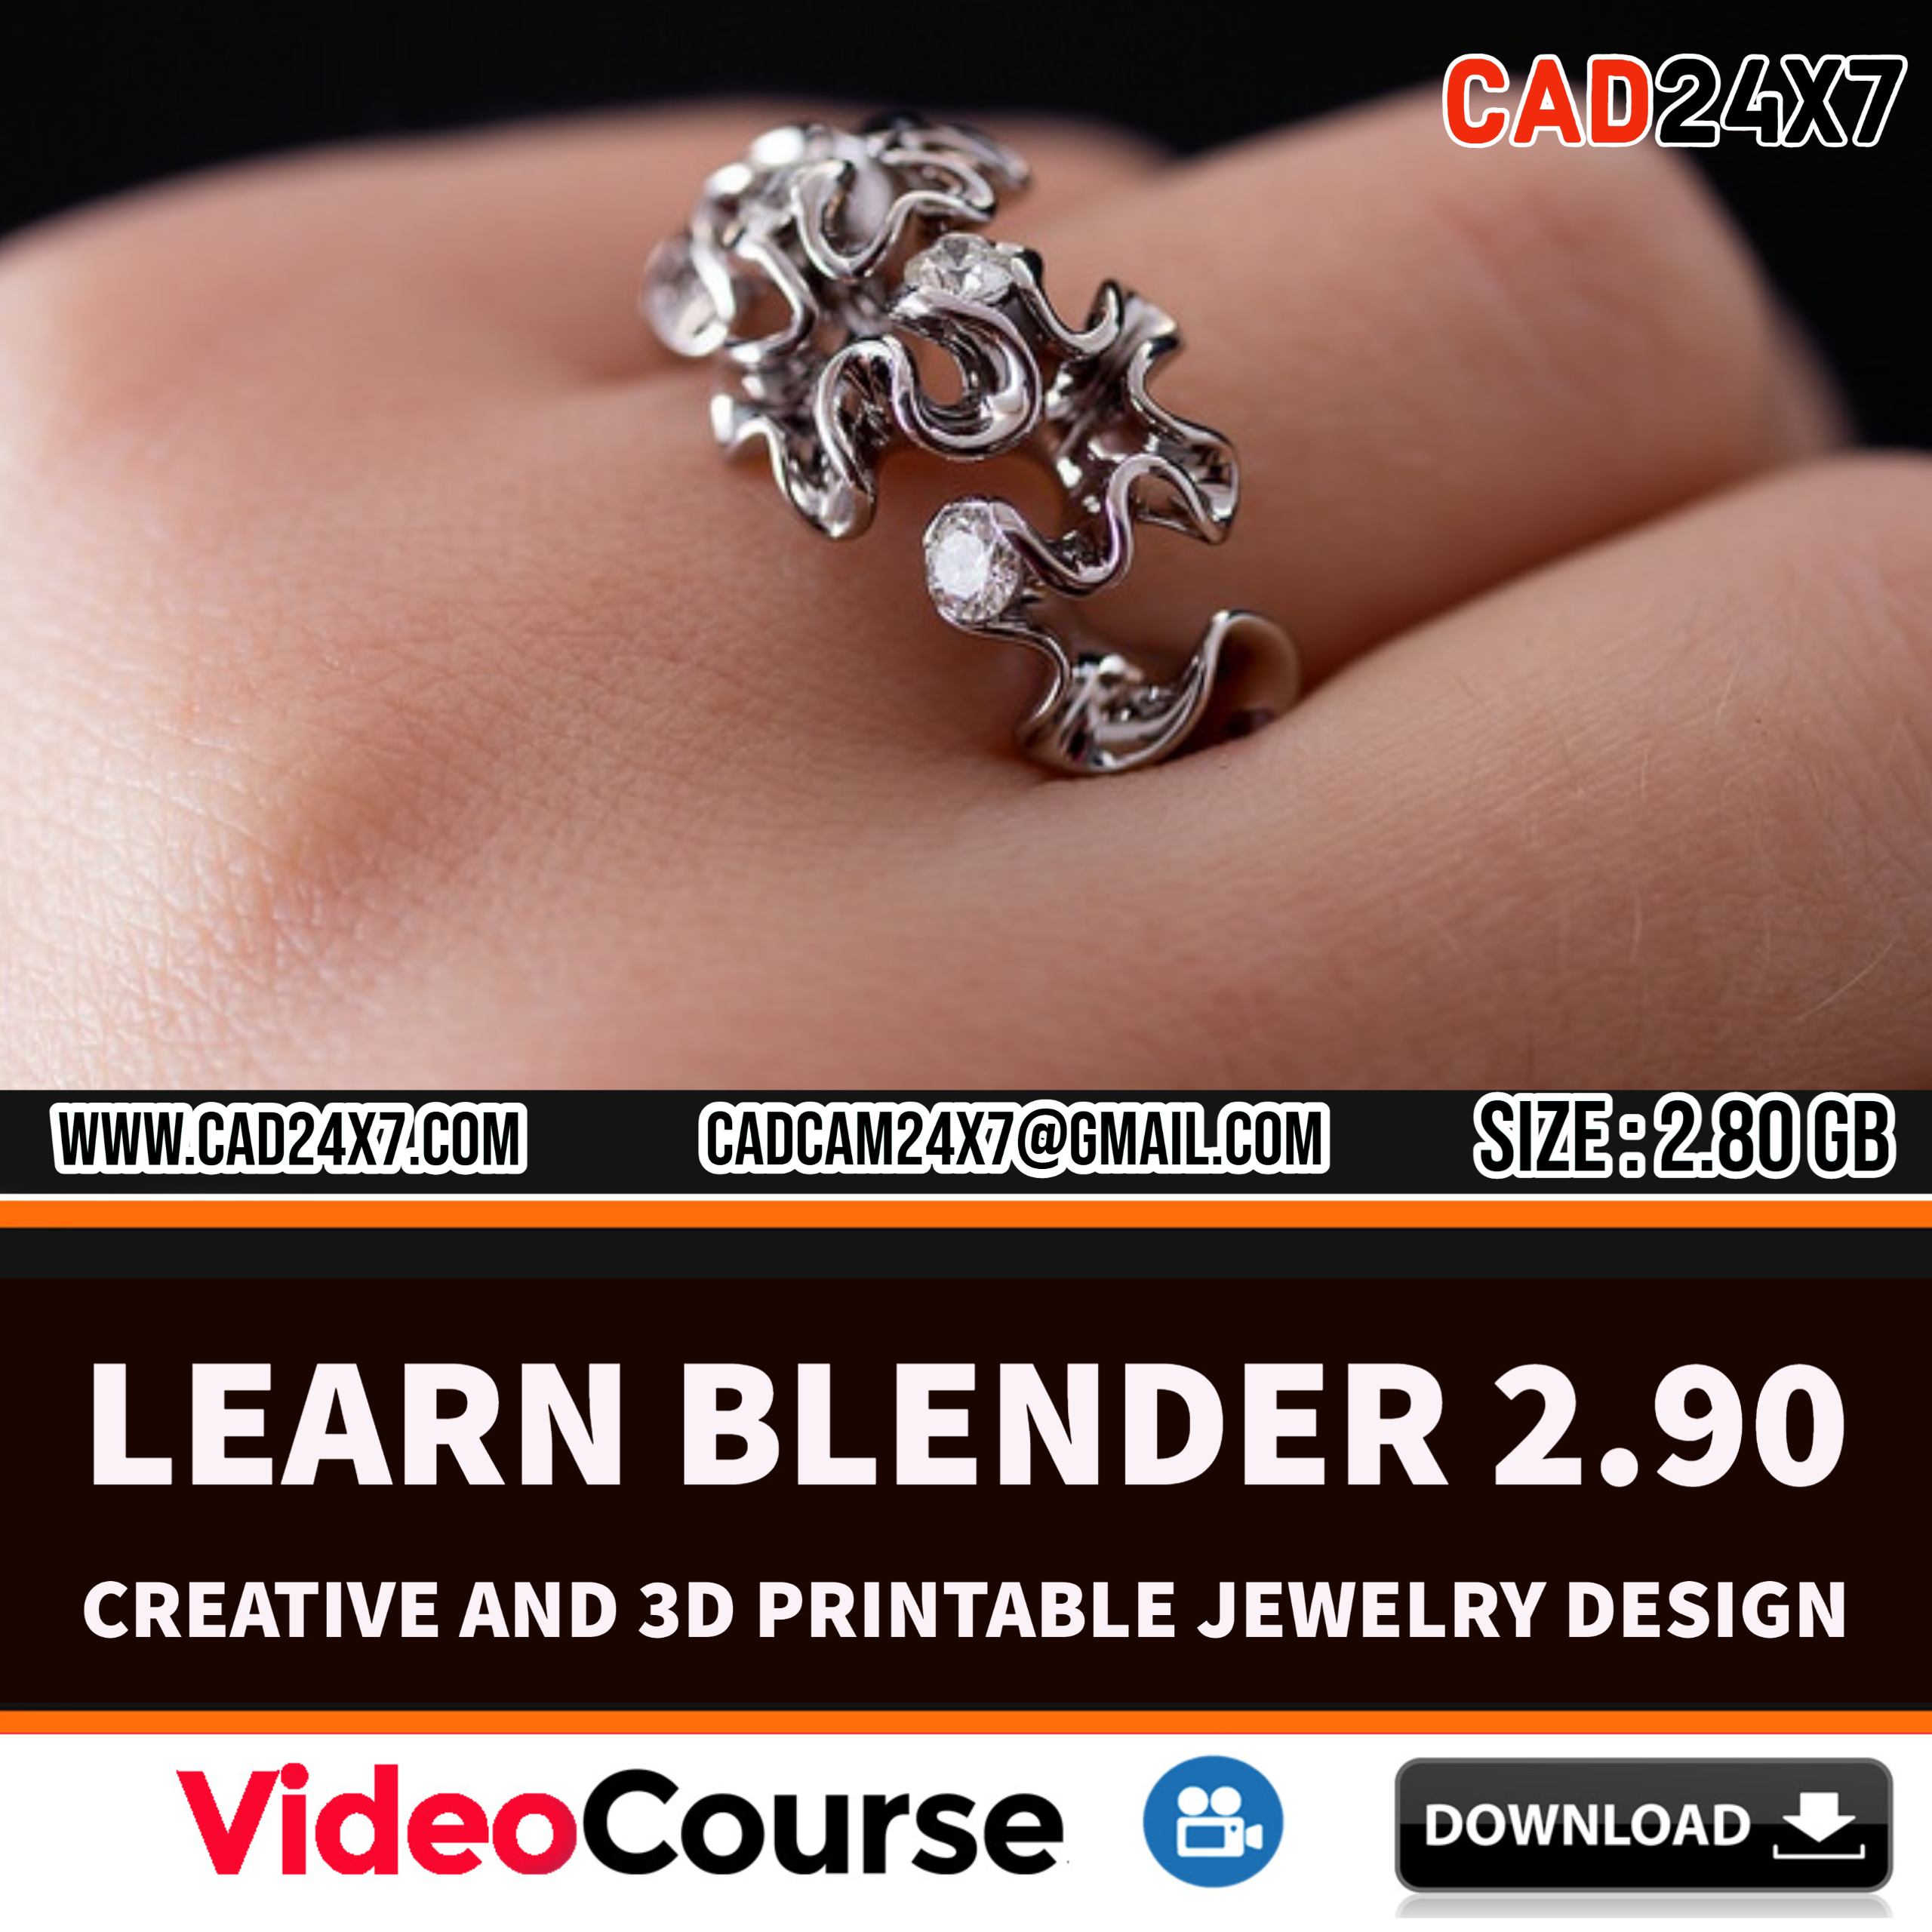 Learn-Blender-2.90-Creative-and-3D-Printable-Jewelry-Design